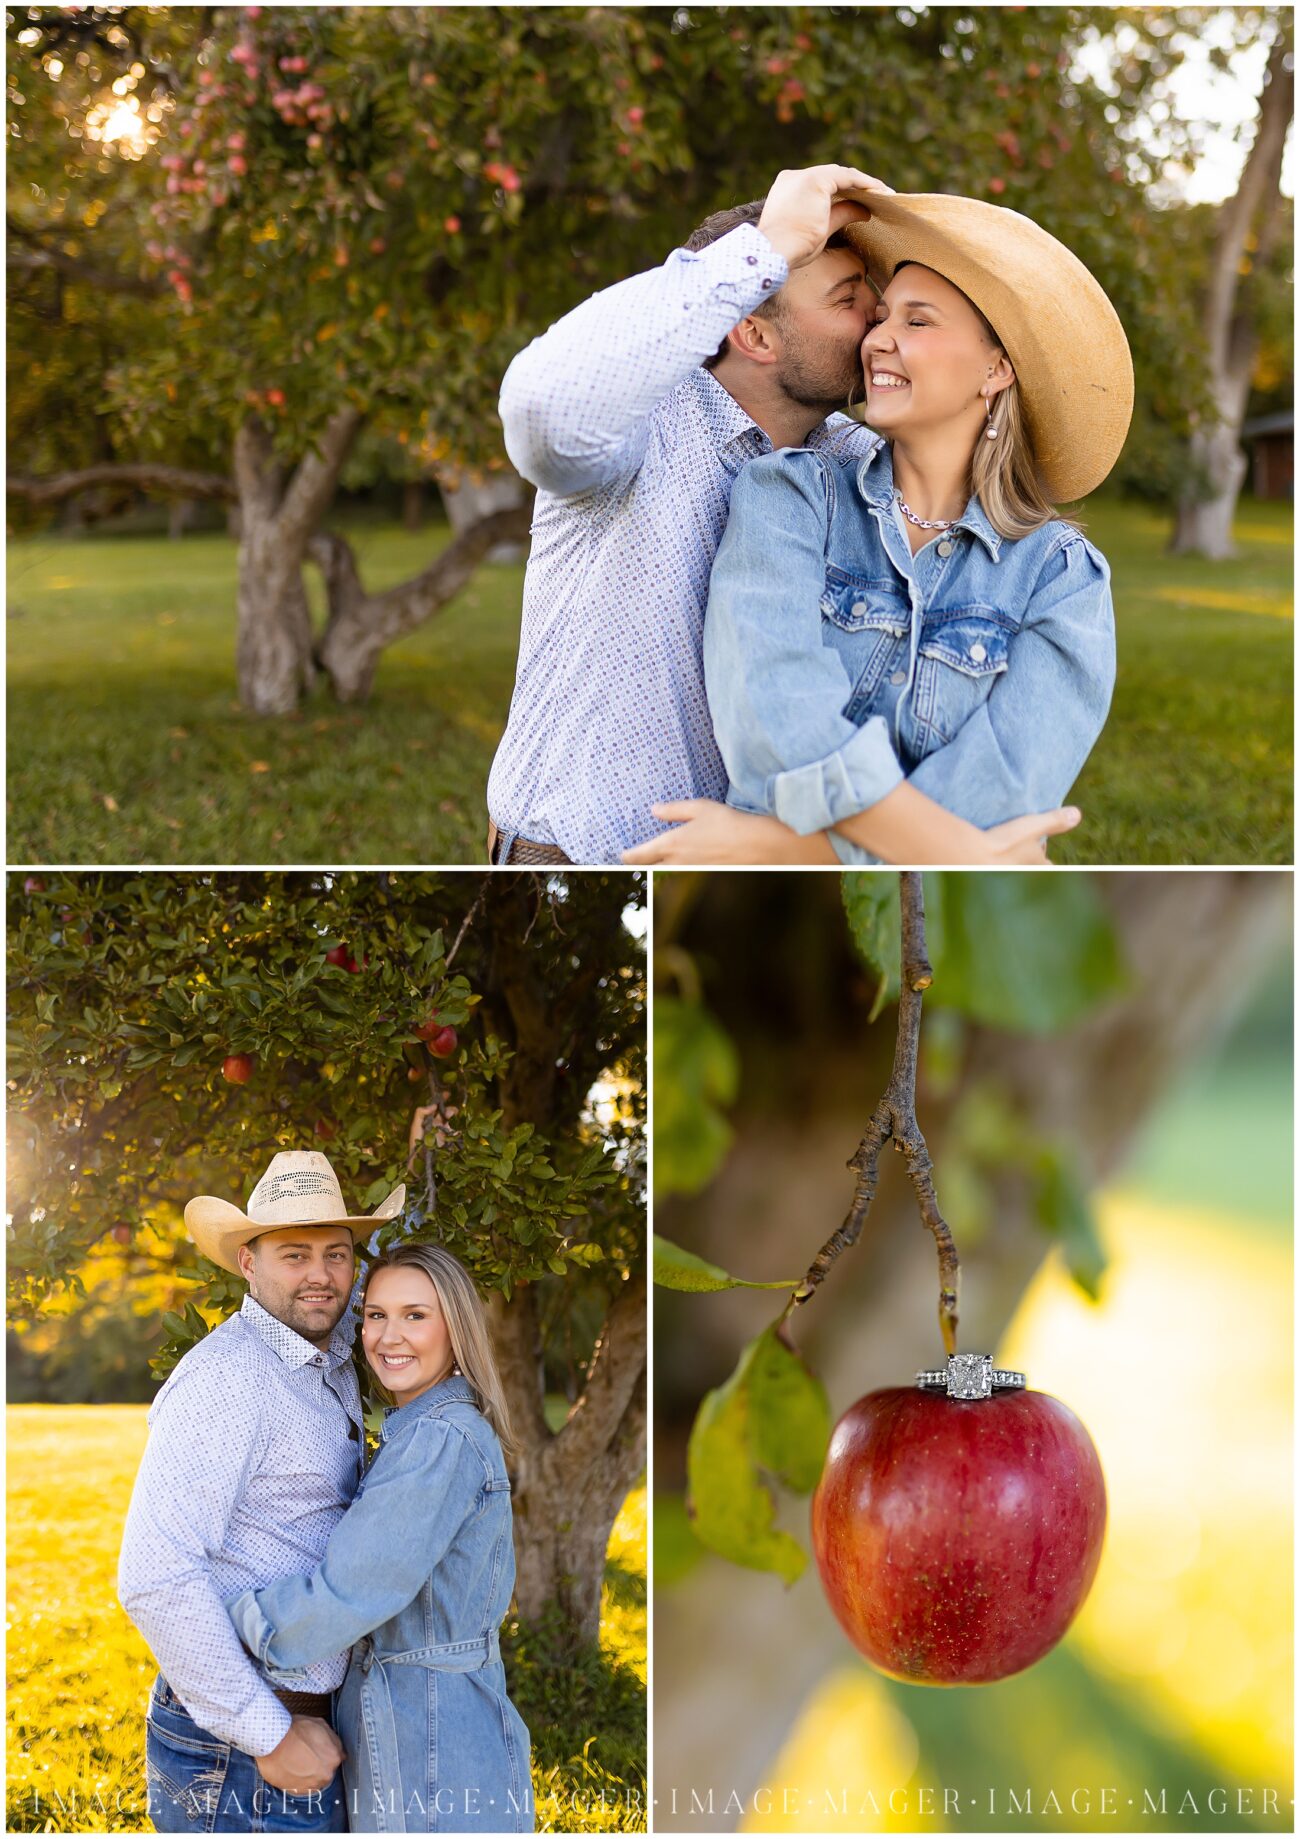 ngagement Photography at Wade's Out-of-State Ranch